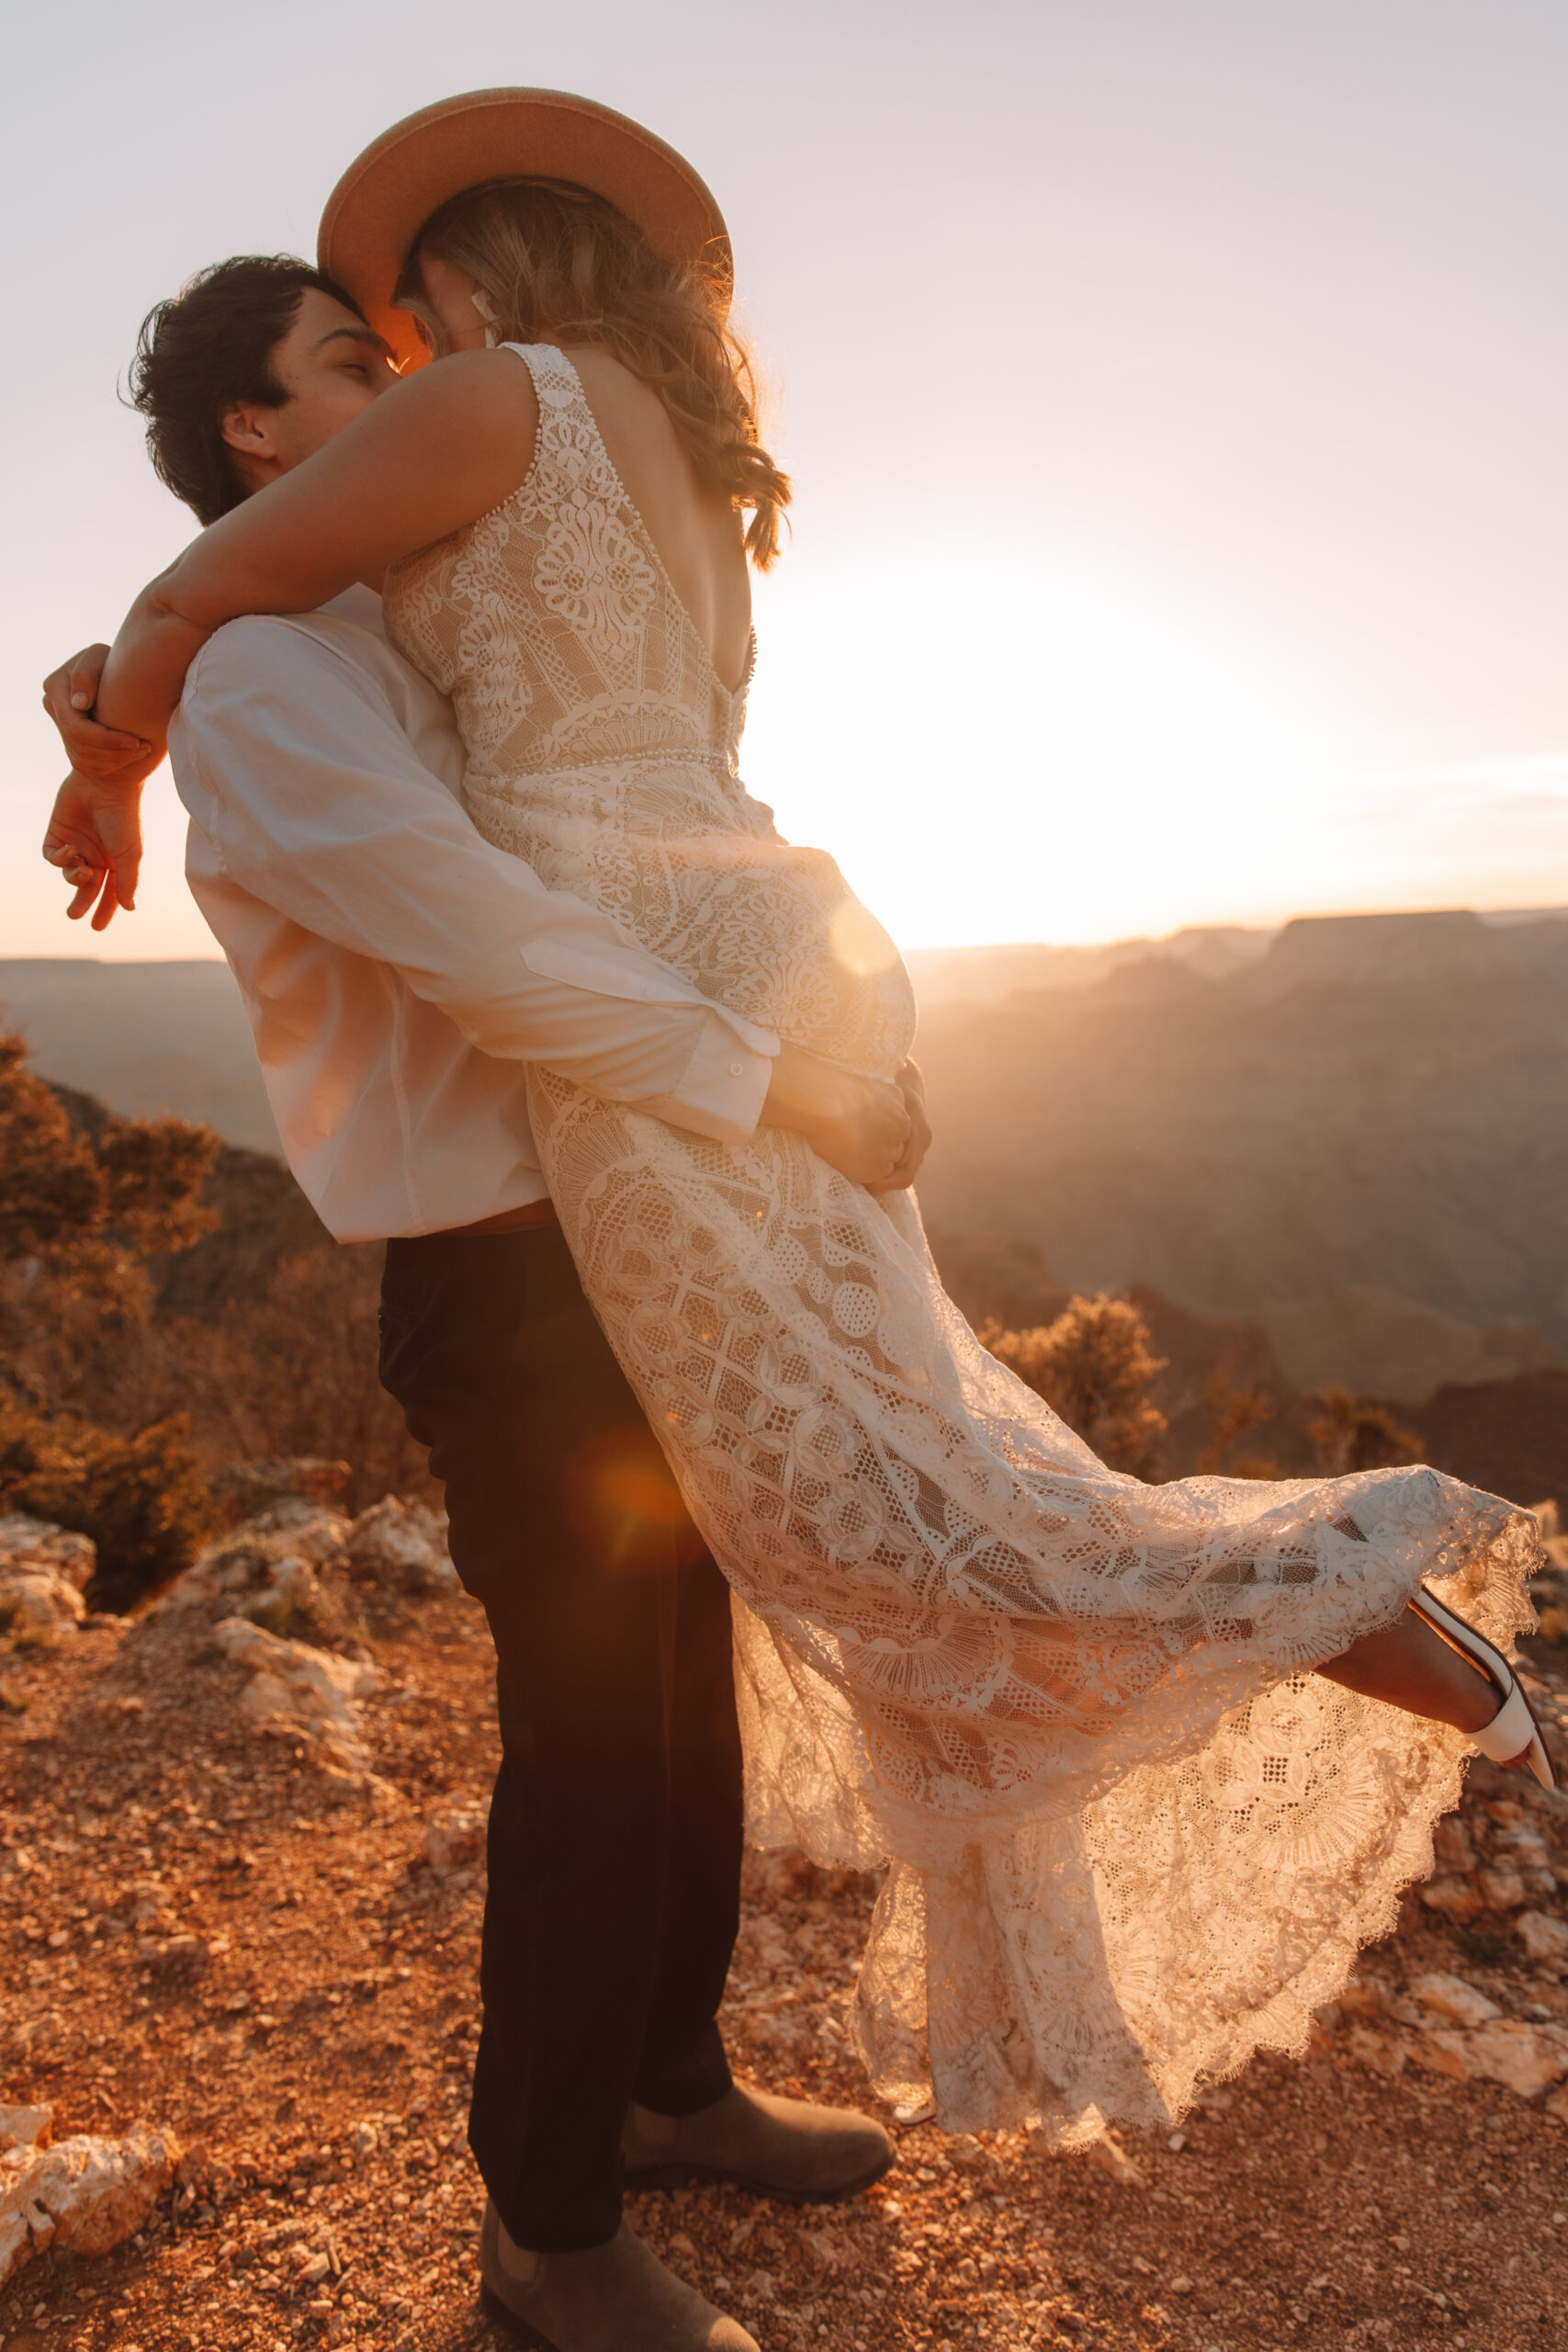 Groom picking up his bride standing on the edge of a cliff at The Grand Canyon in Arizona with the vast canyons in the background. Her leg lifts up passionately as they kiss. She is wearing a hat and an open back  lace wedding dress